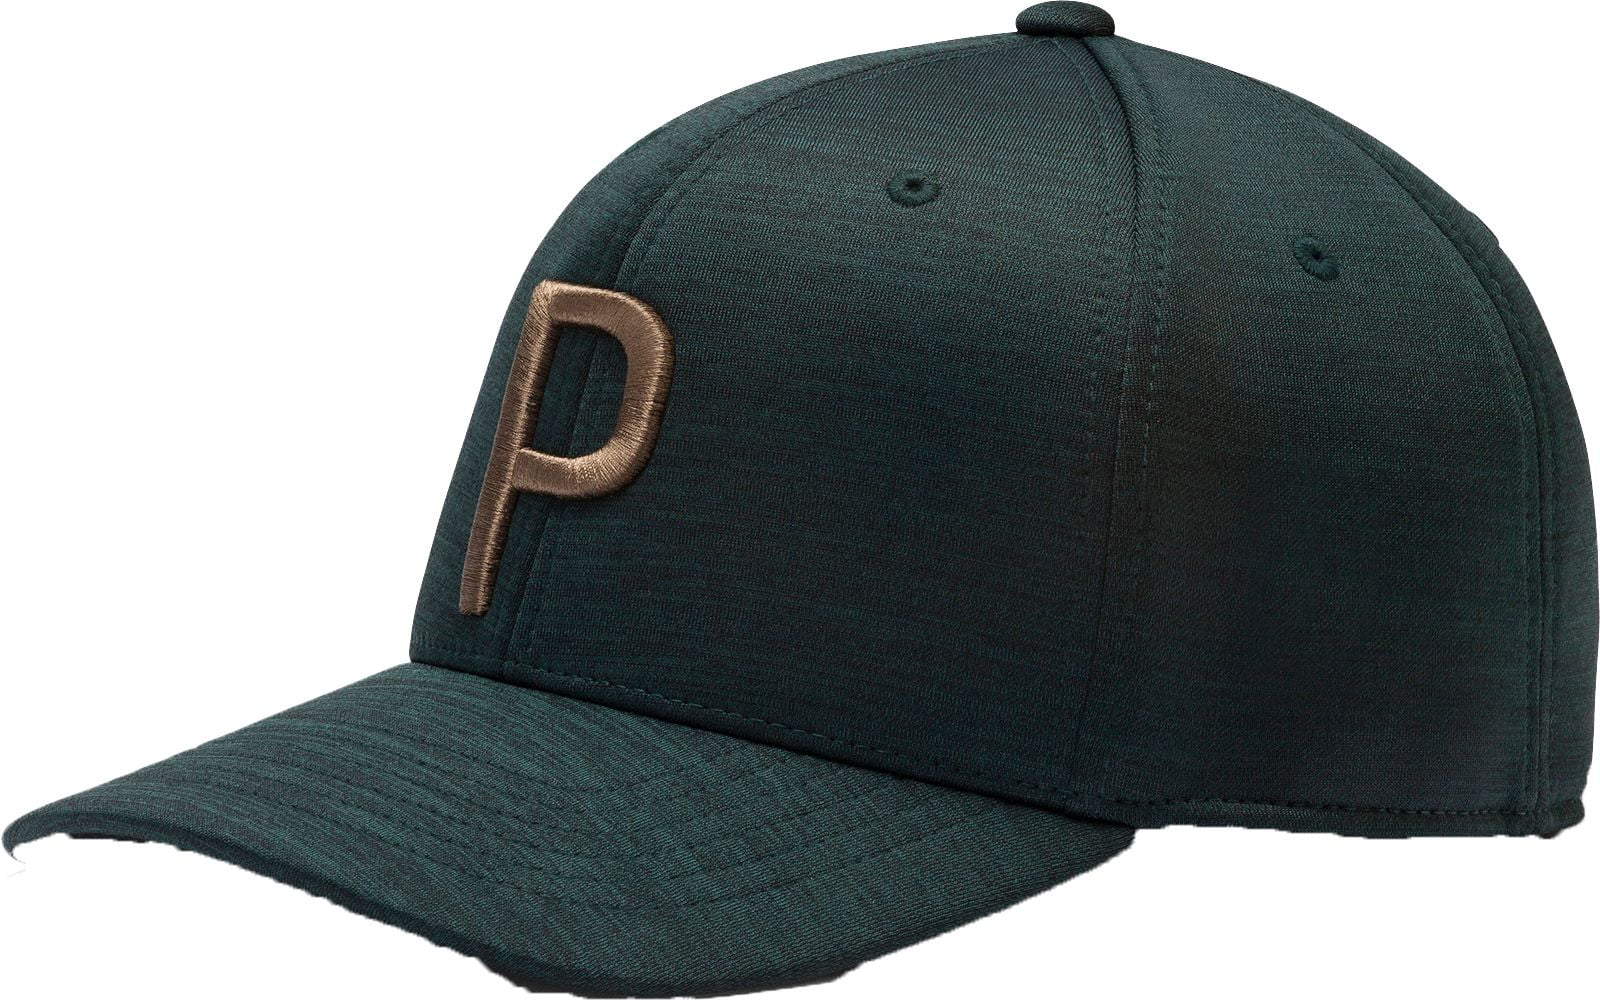 p on fowler's hat